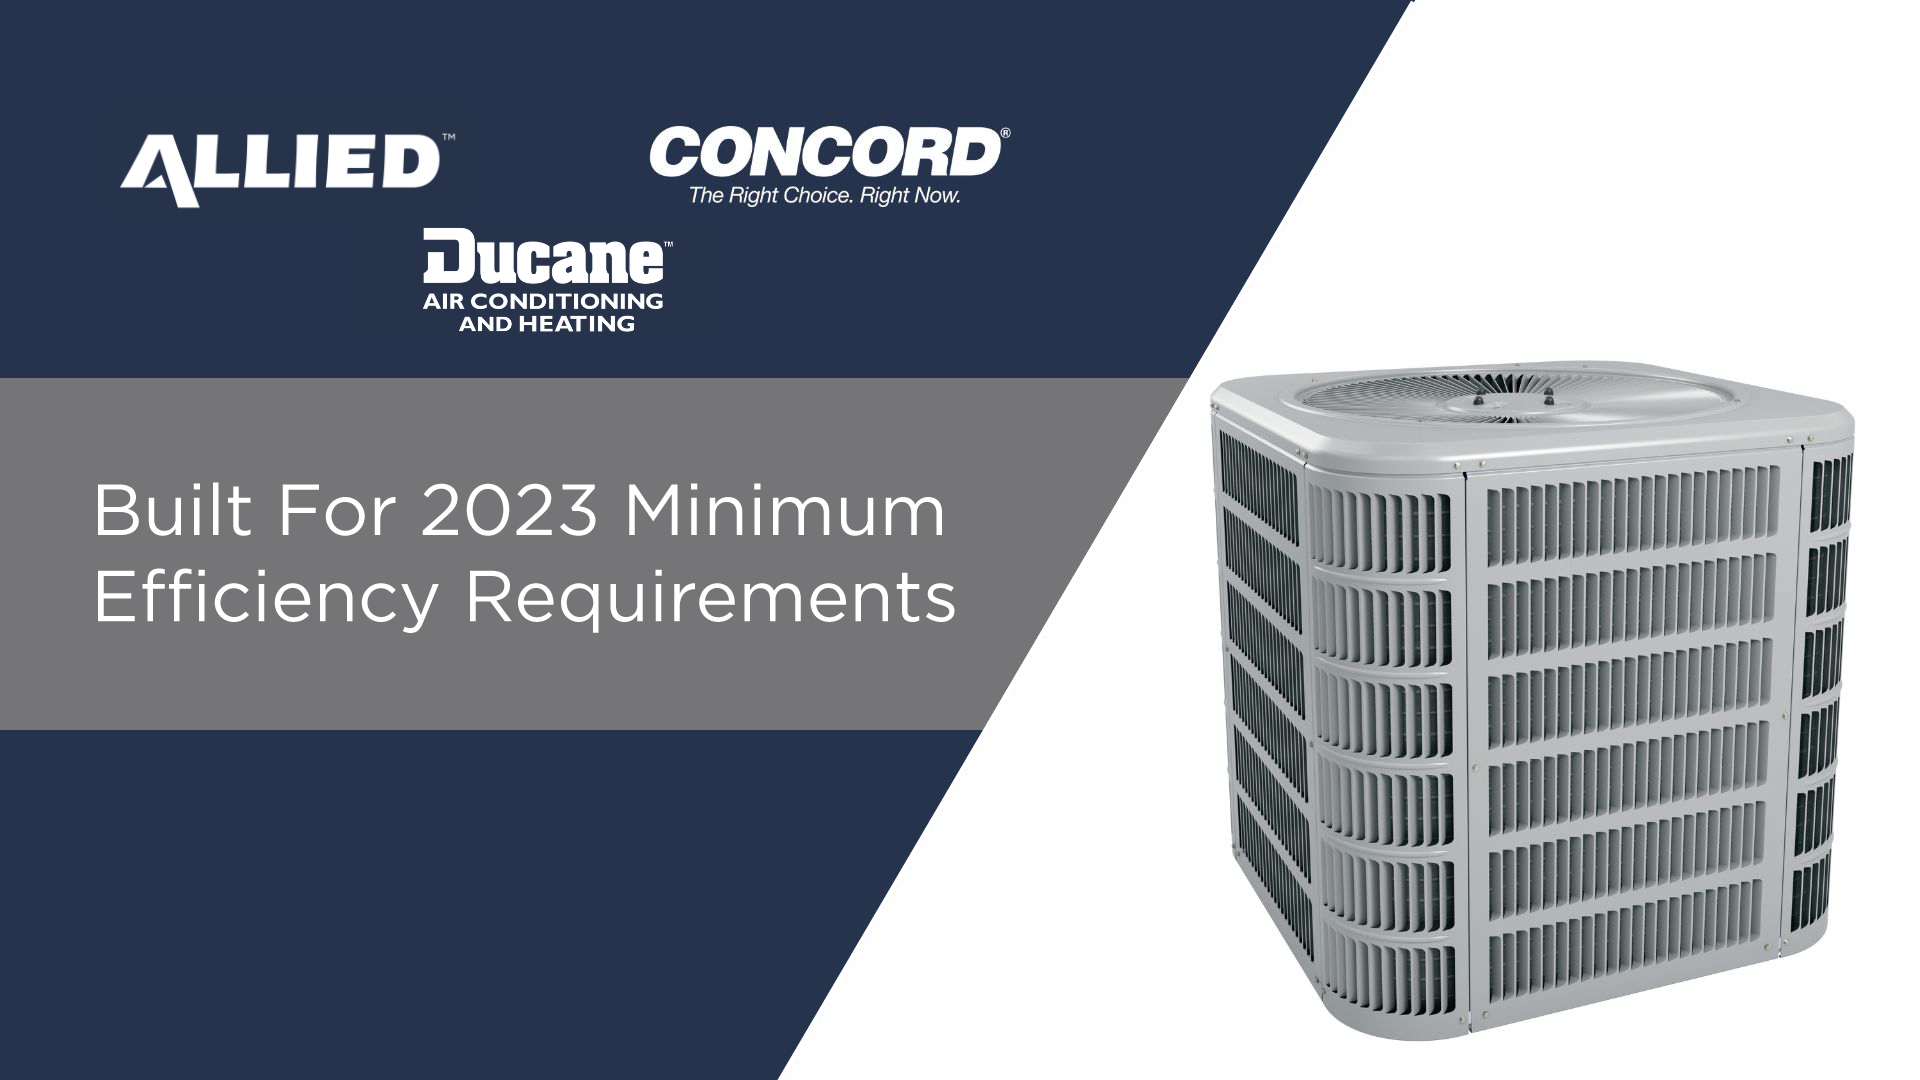  Allied Air Enterprises Keeps Independent Distribution Ahead of the Curve with Early Introduction of 17 SEER Air Conditioner Under Concord®, Ducane™ and Allied™ Brands 